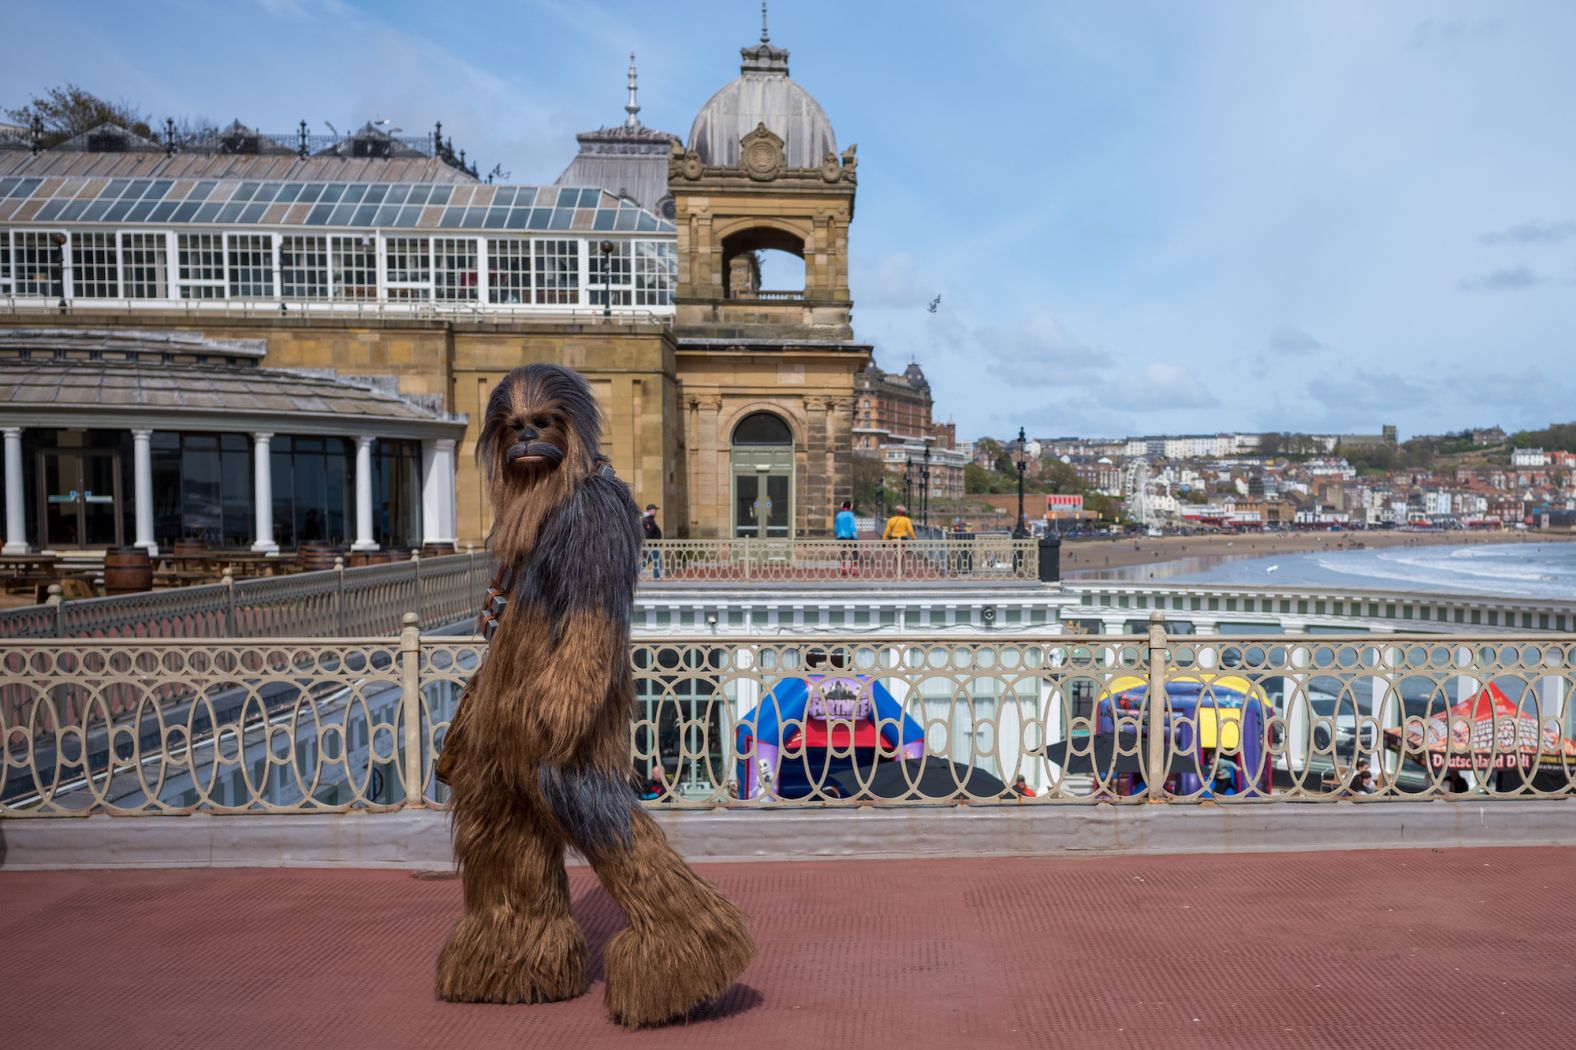 A man dressed as "Star Wars" character Chewbacca walks near the Scarborough Spa in Scarborough, England, on Sunday, April 21. The seaside town was hosting a sci-fi convention.